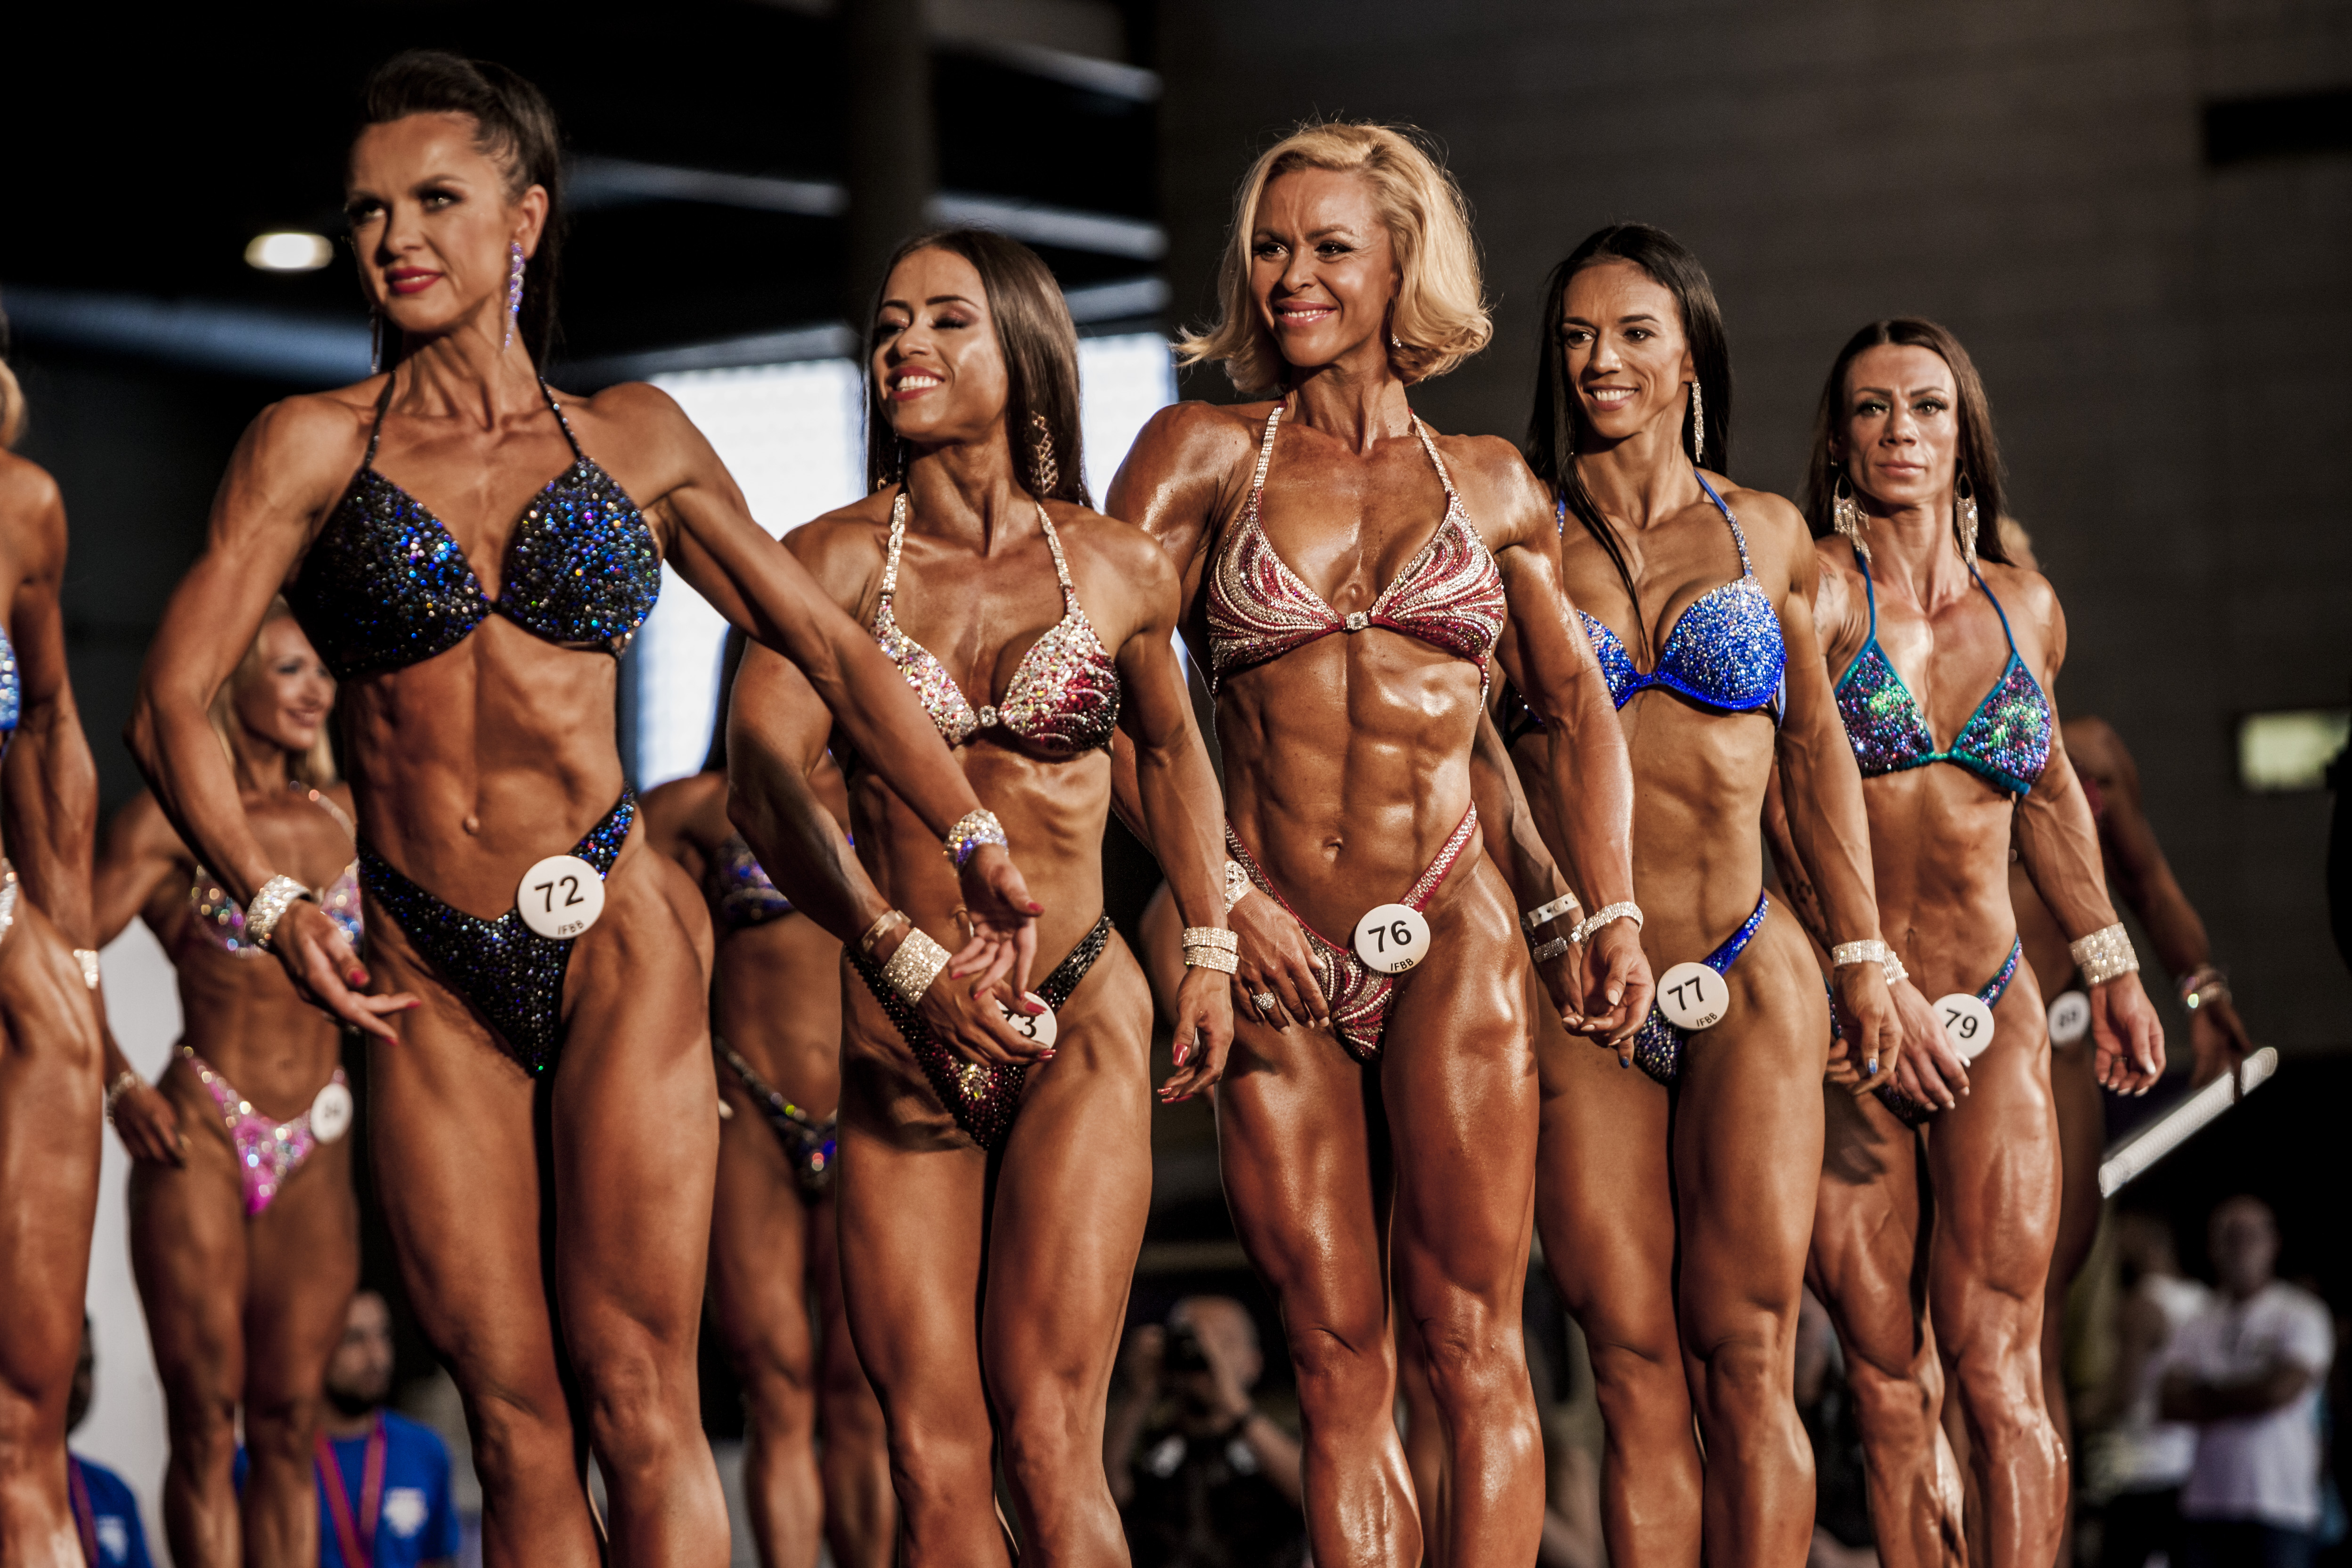 The Bodybuilding Wellness Division is All About the Lower Body image